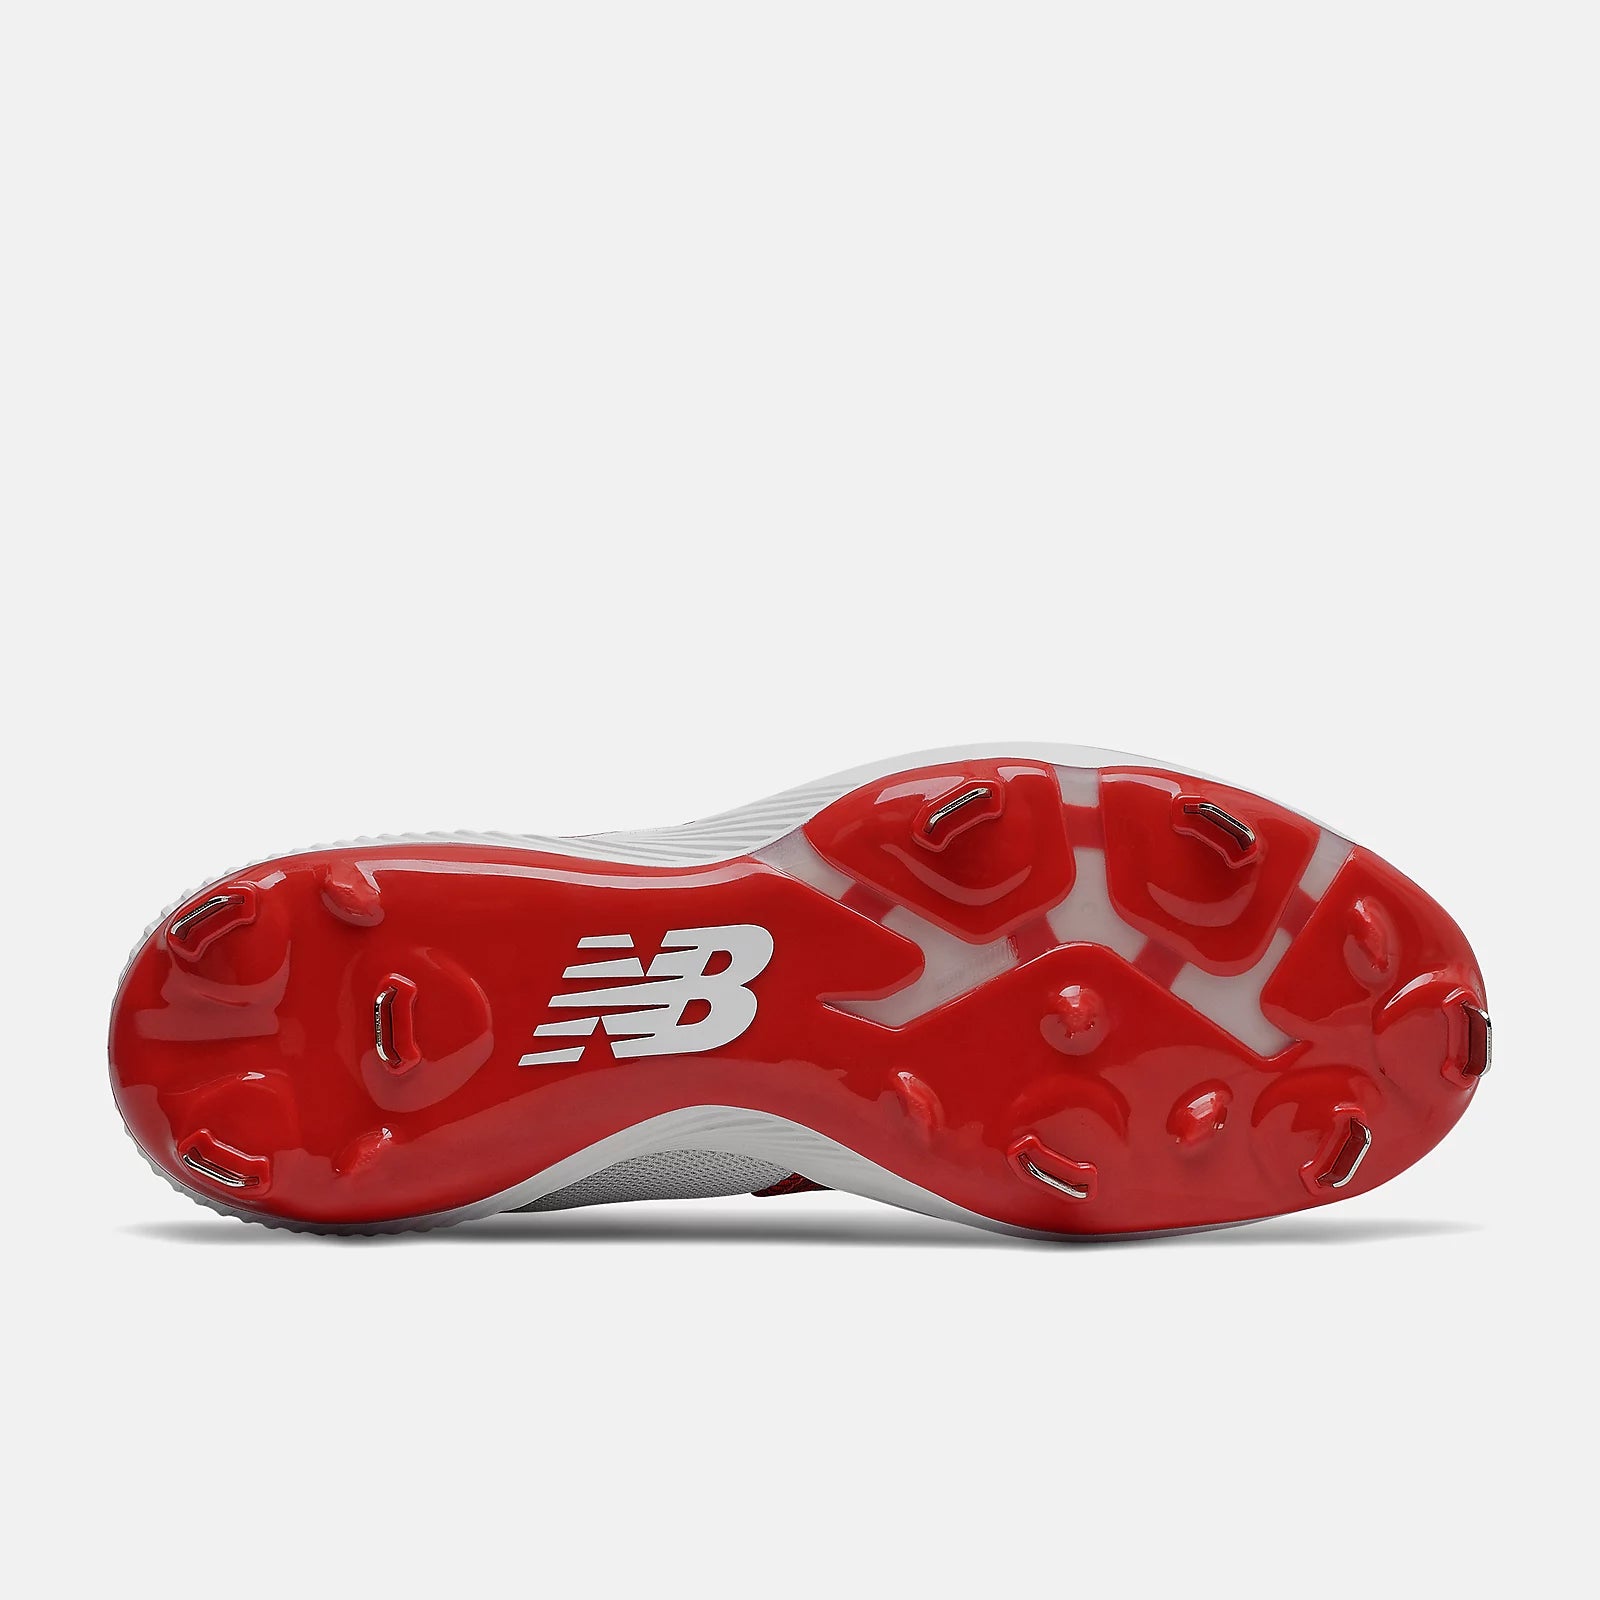 New Balance - Red/White FuelCell 4040v6 Metal Spikes (L4040TR6)